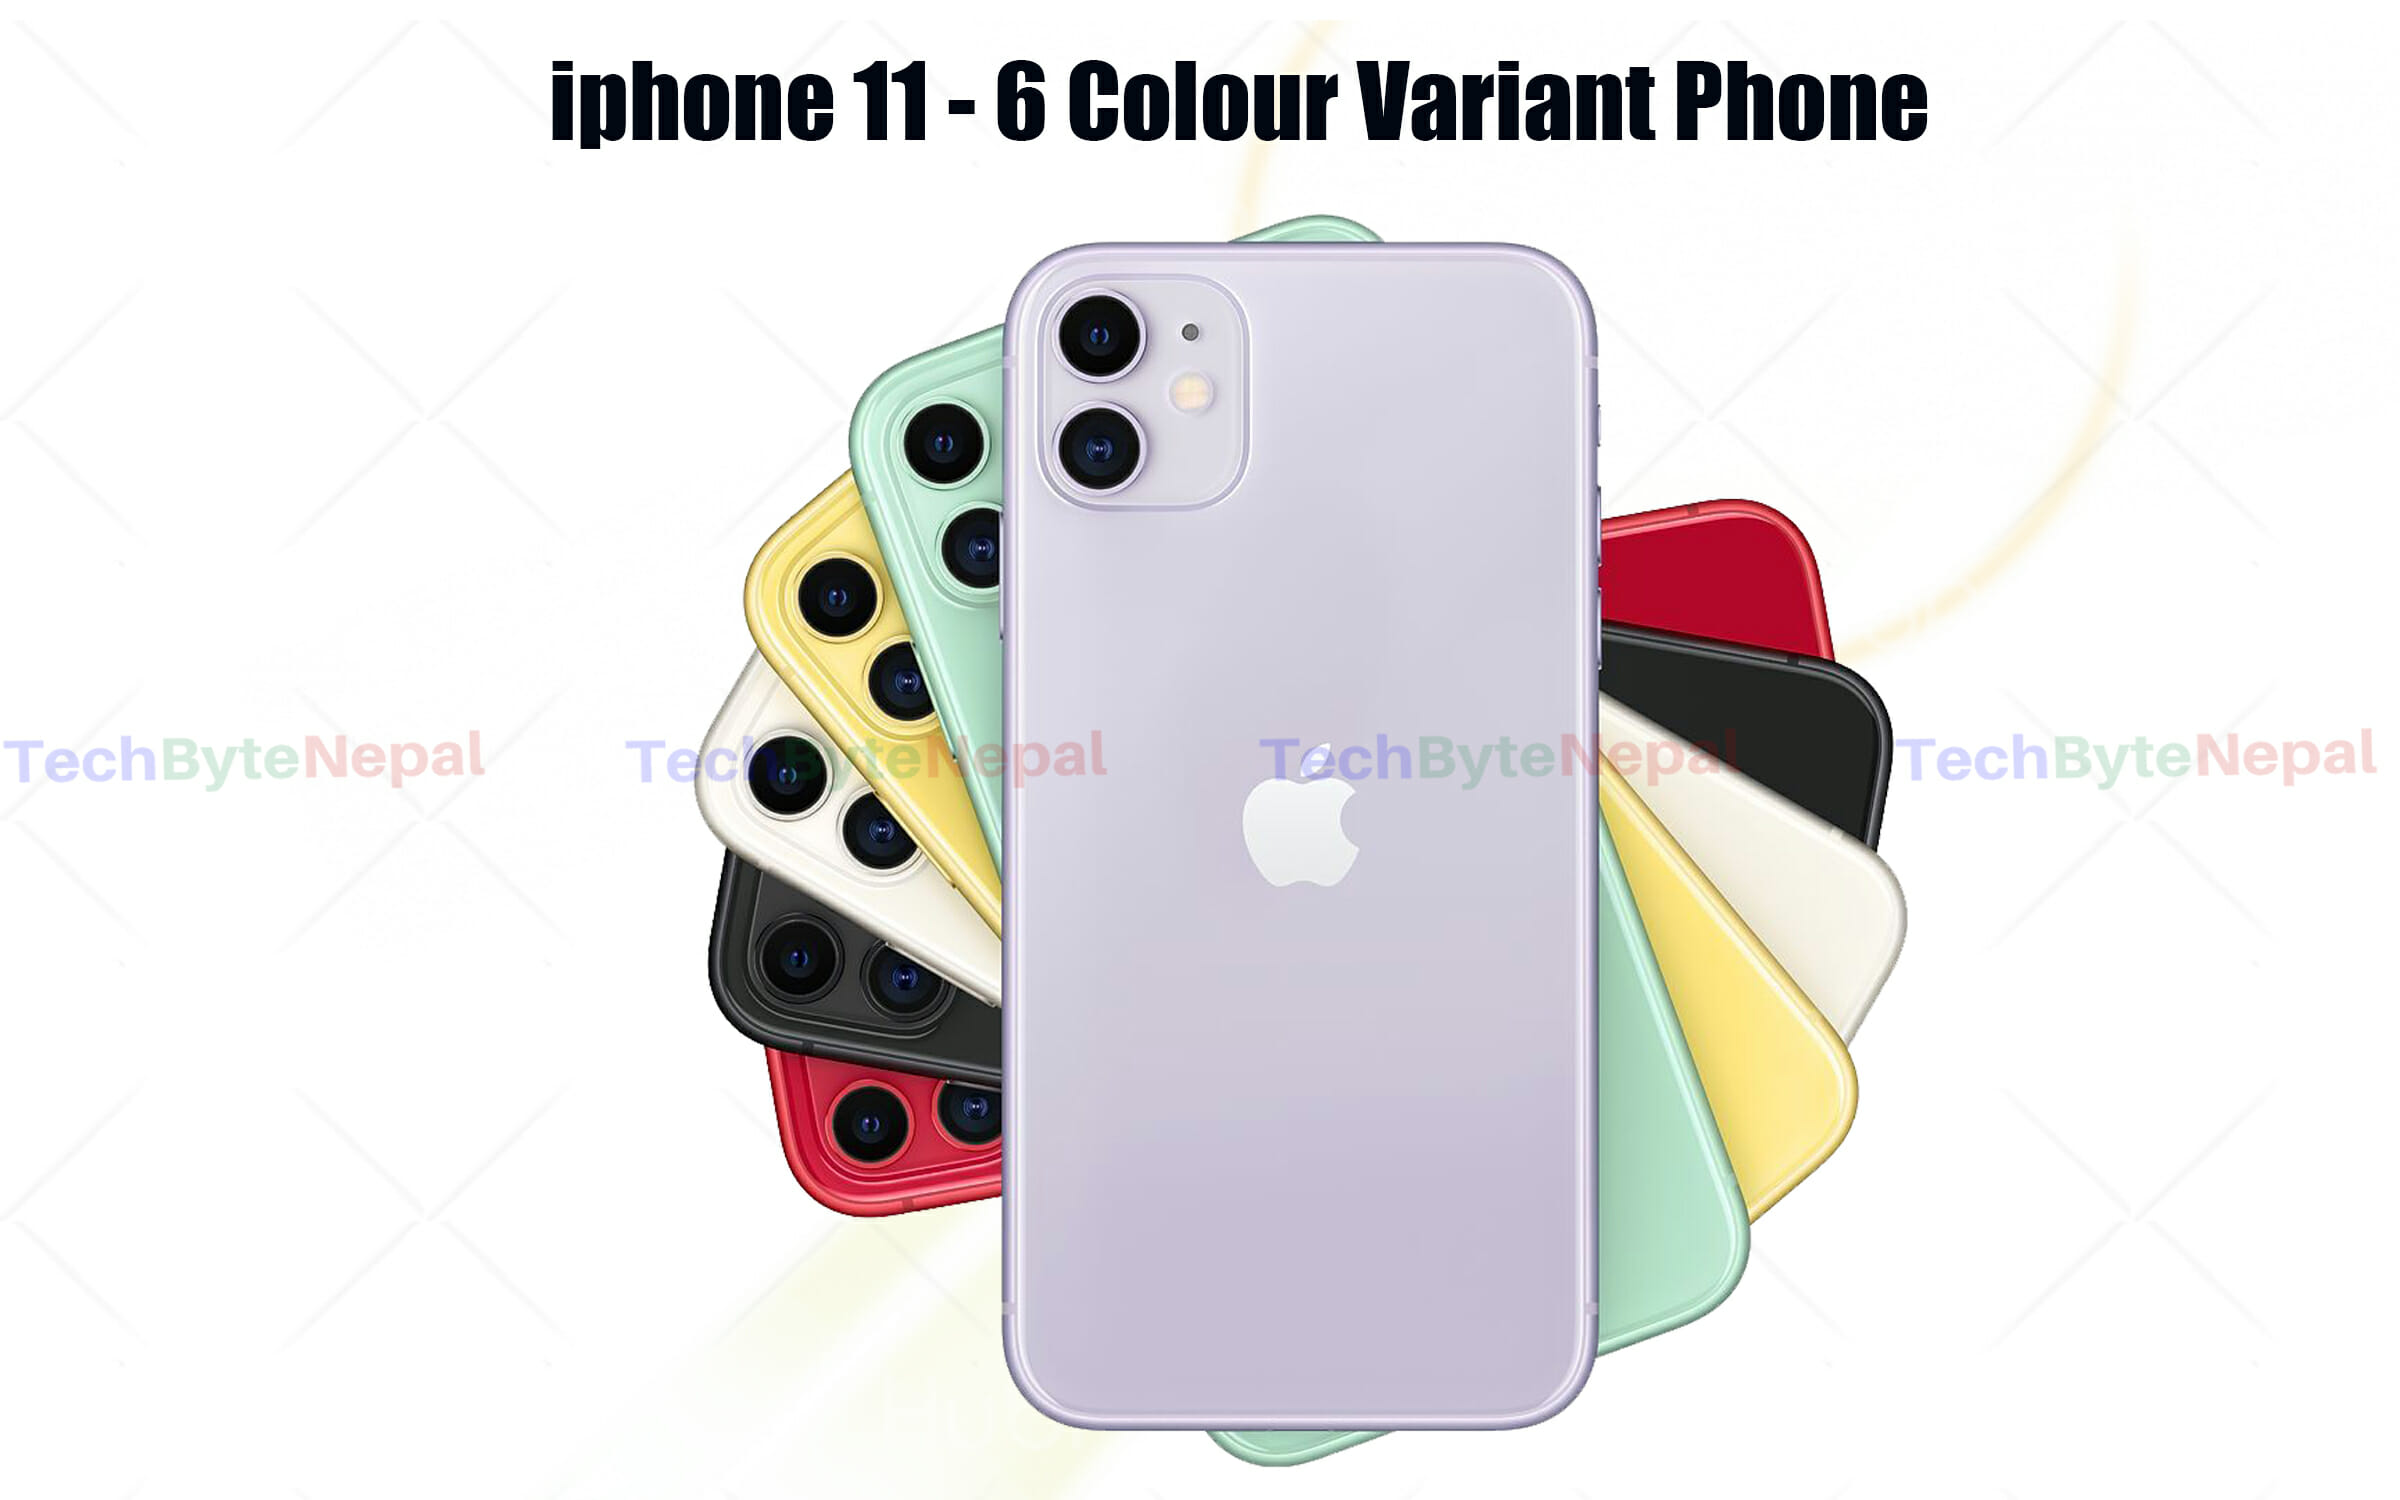 iPhone 11 color variants